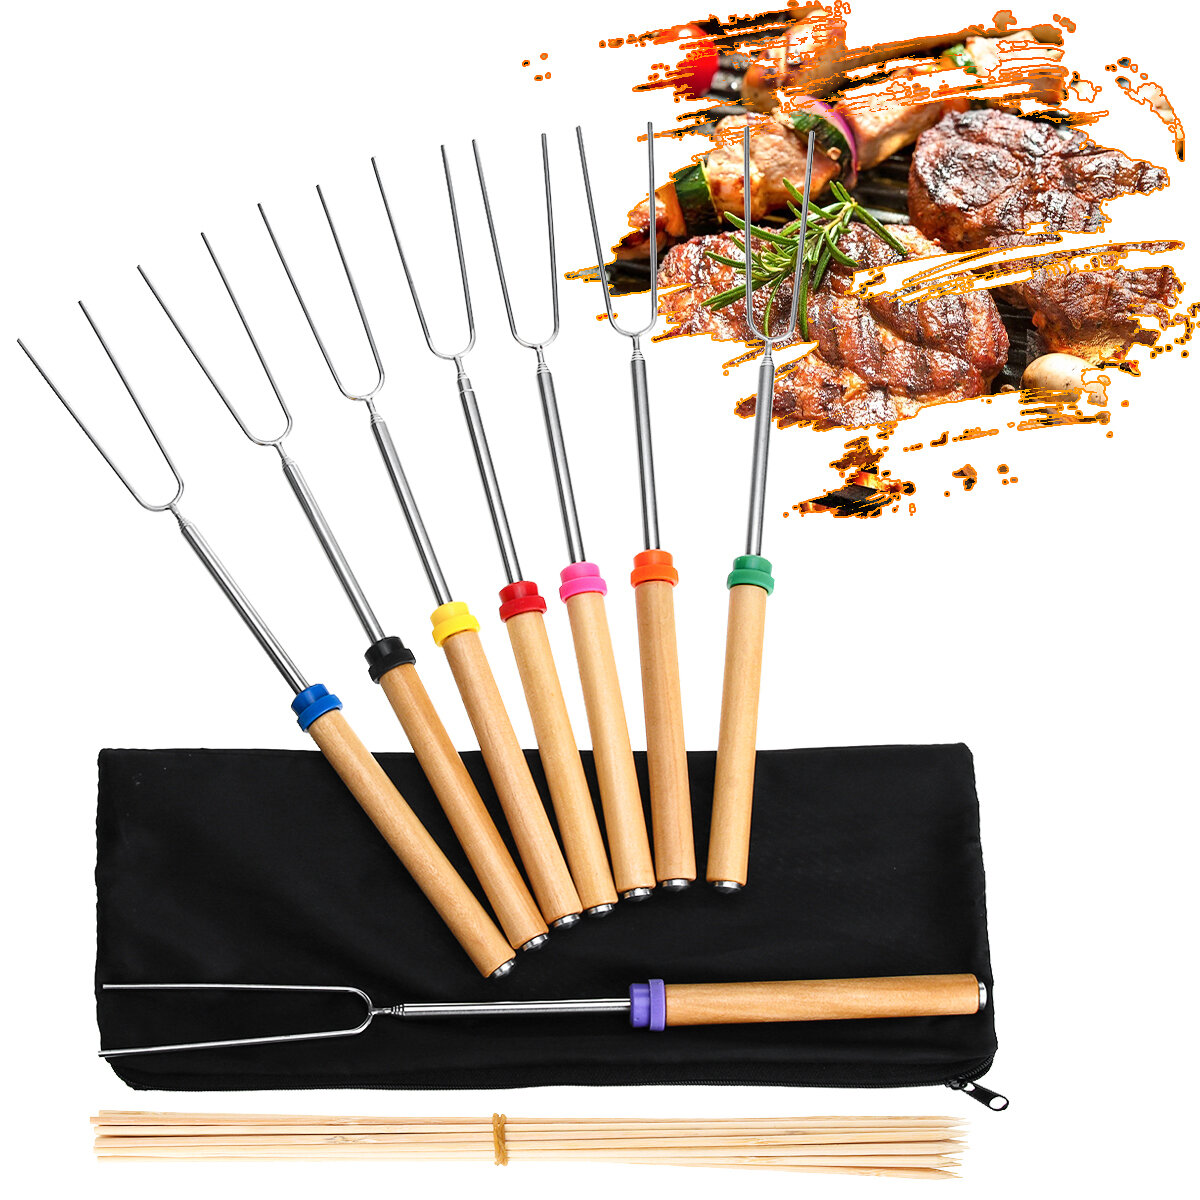 8PCS Roasting Sticks Telescoping 12"-32" Smore Sticks Skewers Set with Wooden Handle for BBQ Hot Dog Fork Fire Pit Camping Cookware